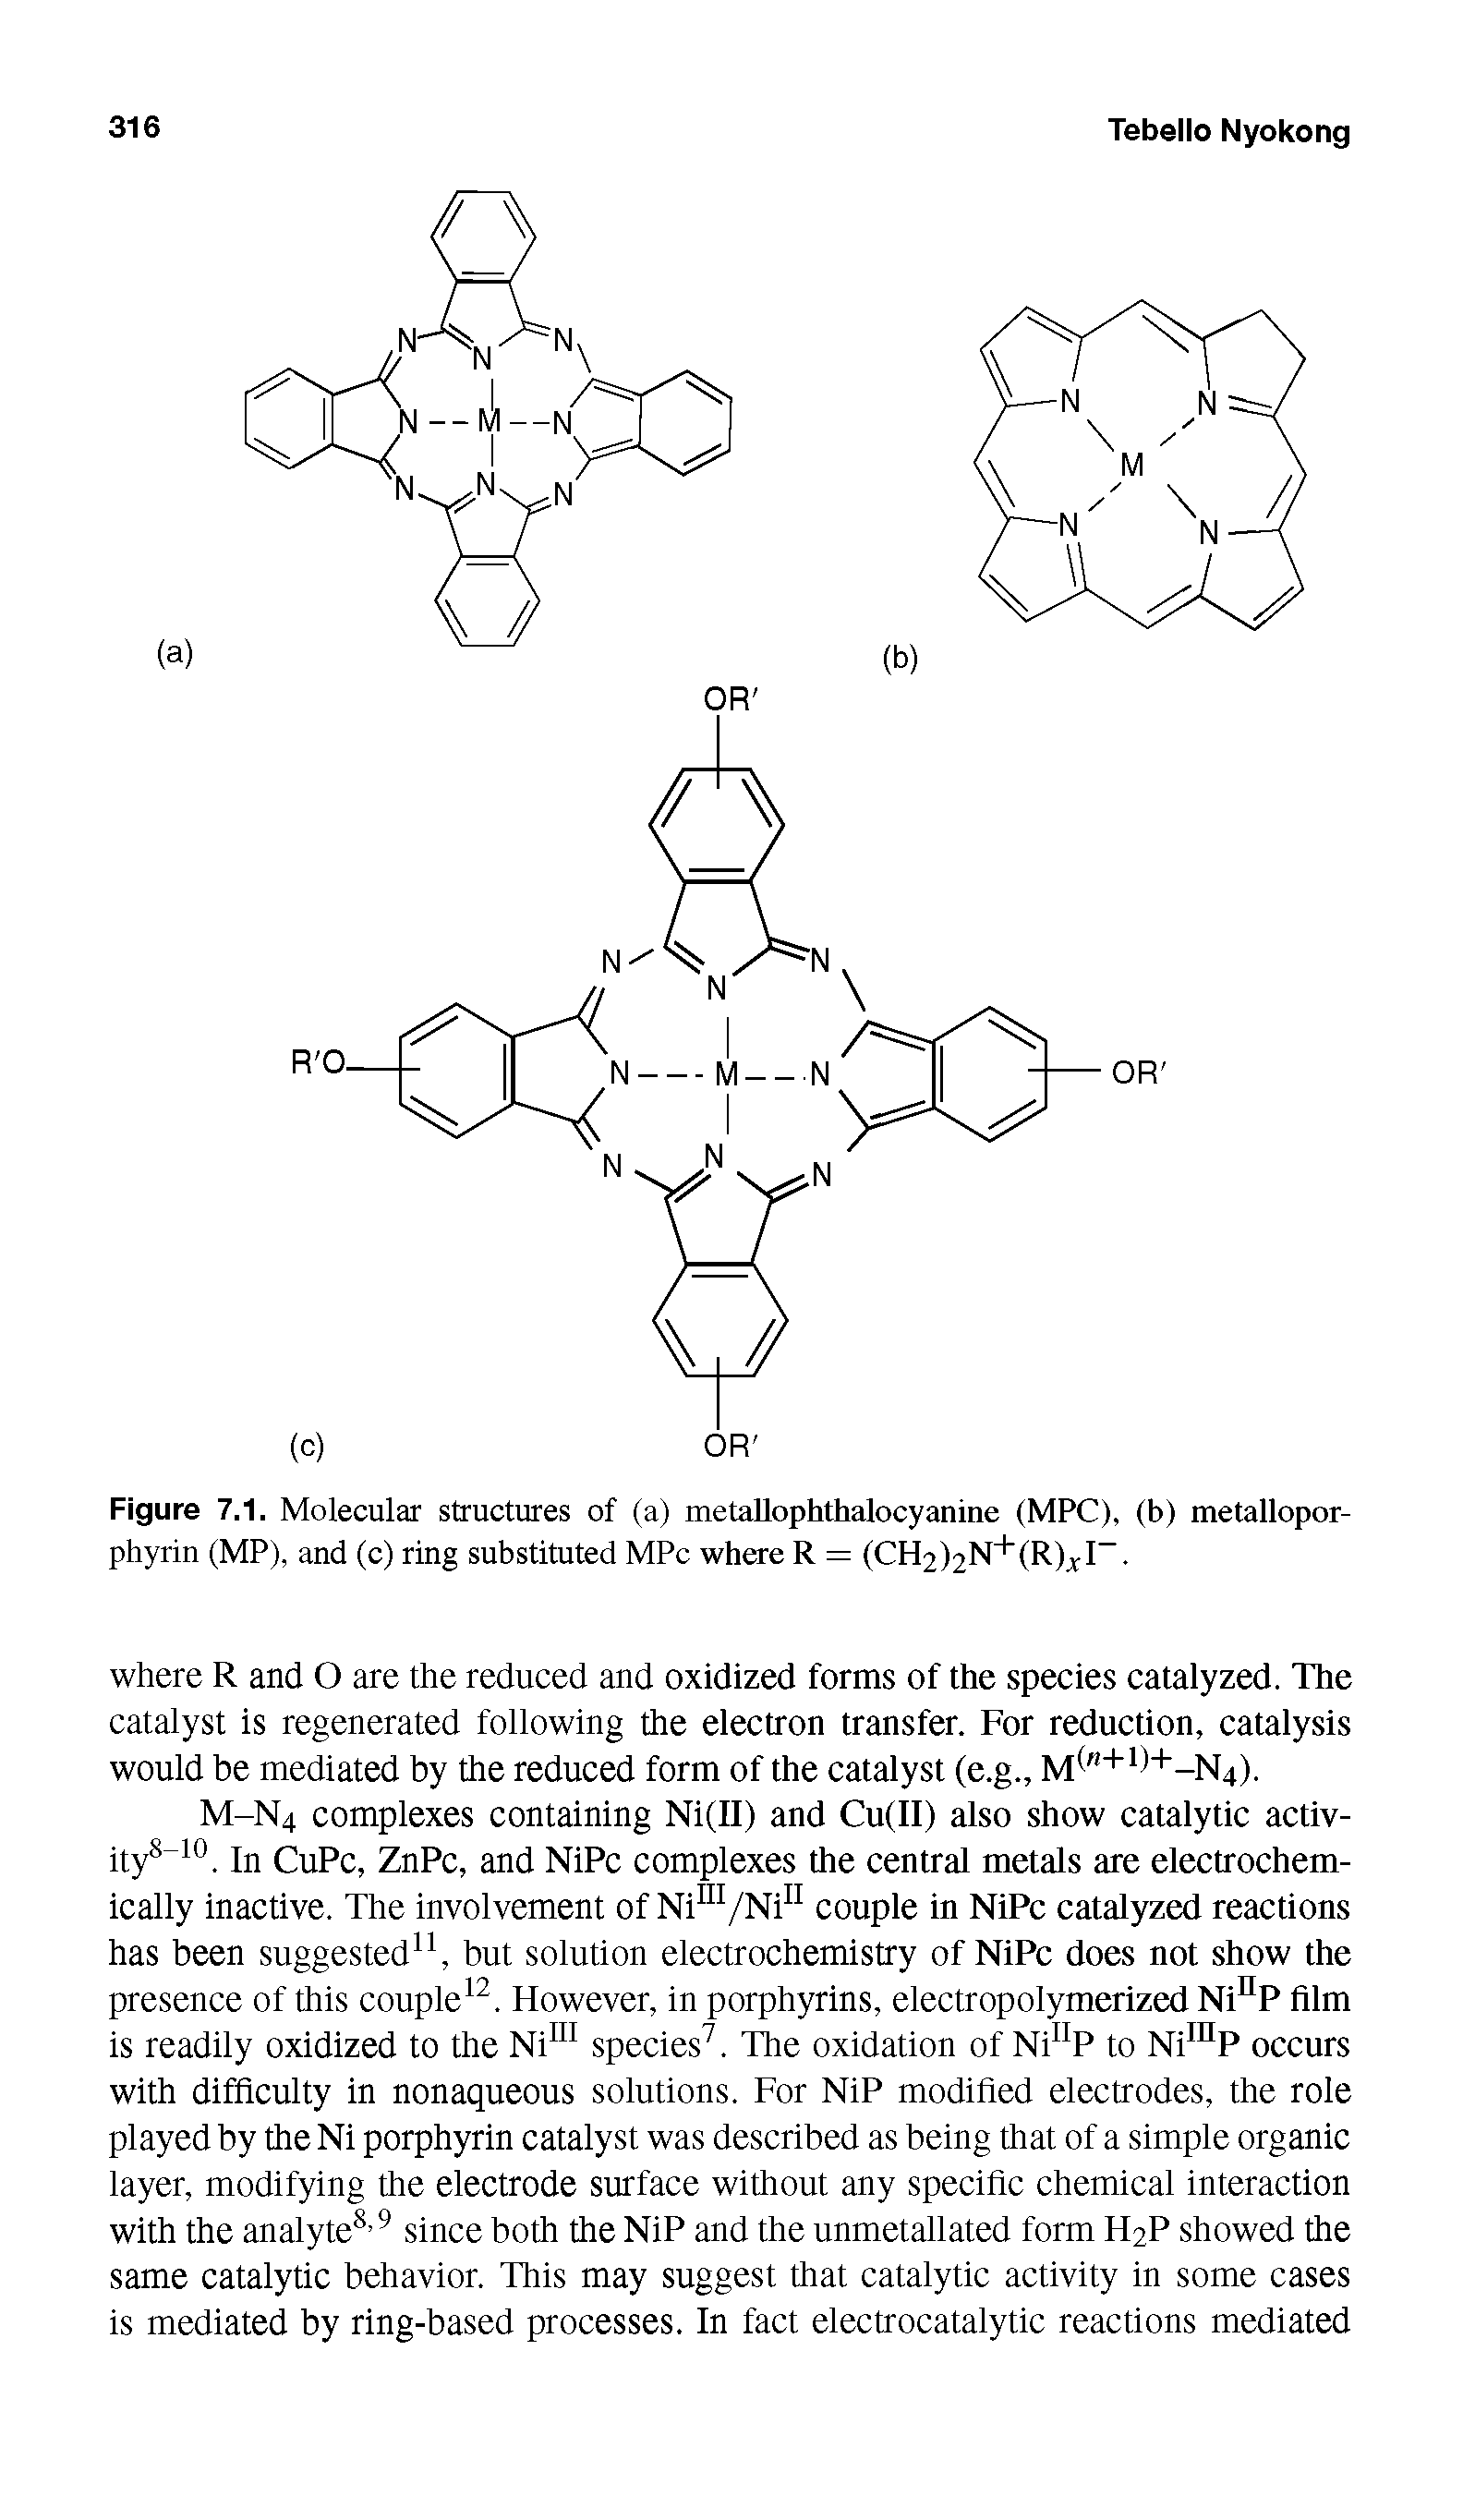 Figure 7.1. Molecular structures of (a) metallophthalocyanine (MPC), (b) metallopor-phyrin (MP), and (c) ring substituted MPc where R = (CH2)2N b(R)xI -...